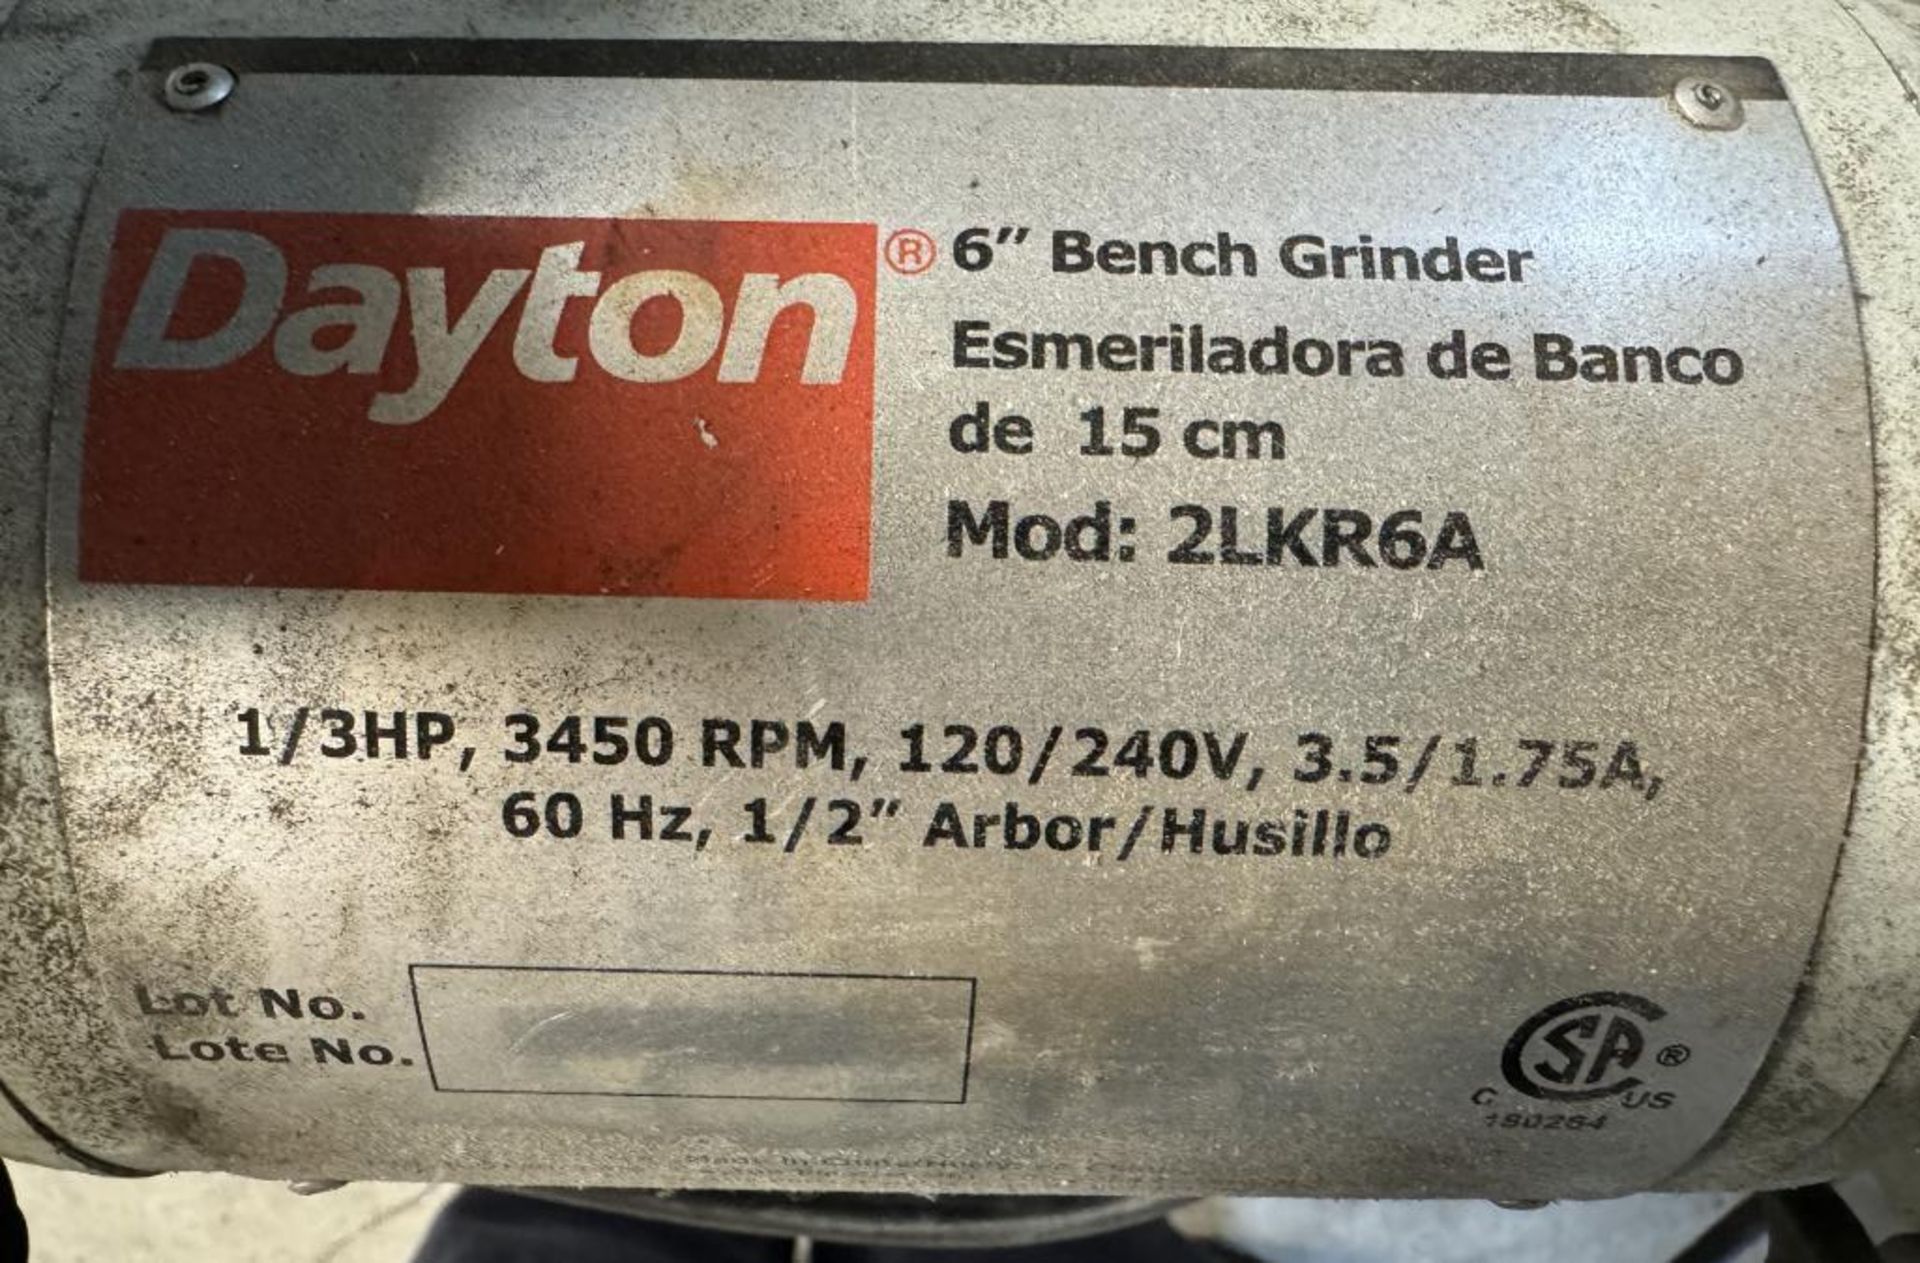 Lot Consisting Of: (2) Bench Grinders. With (1) Dayton model 2LKT1B 8" grinder, (1) Dayton model 2LK - Image 7 of 7